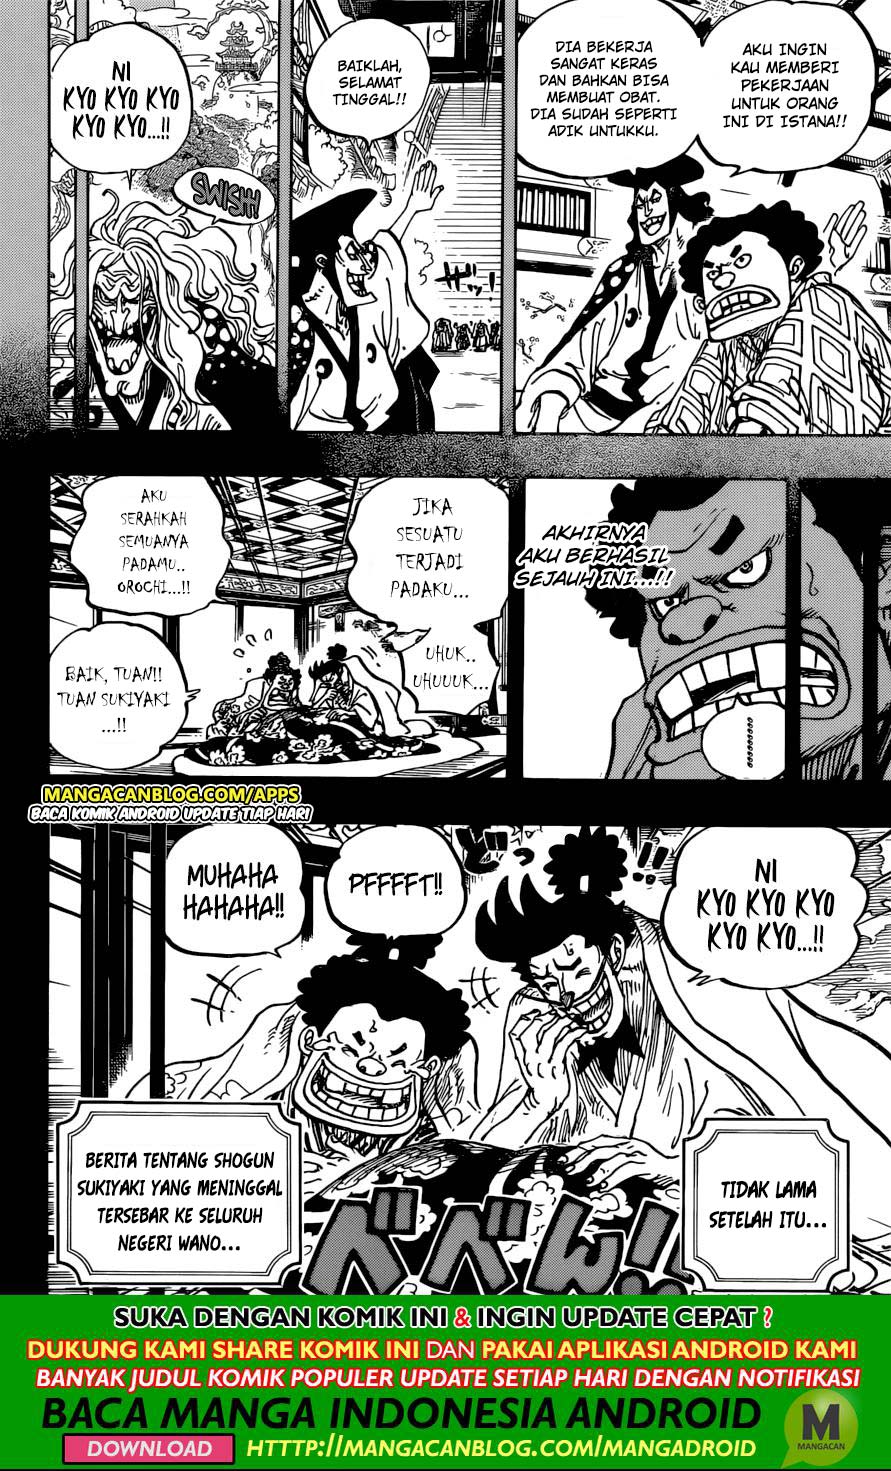 One Piece Chapter 965